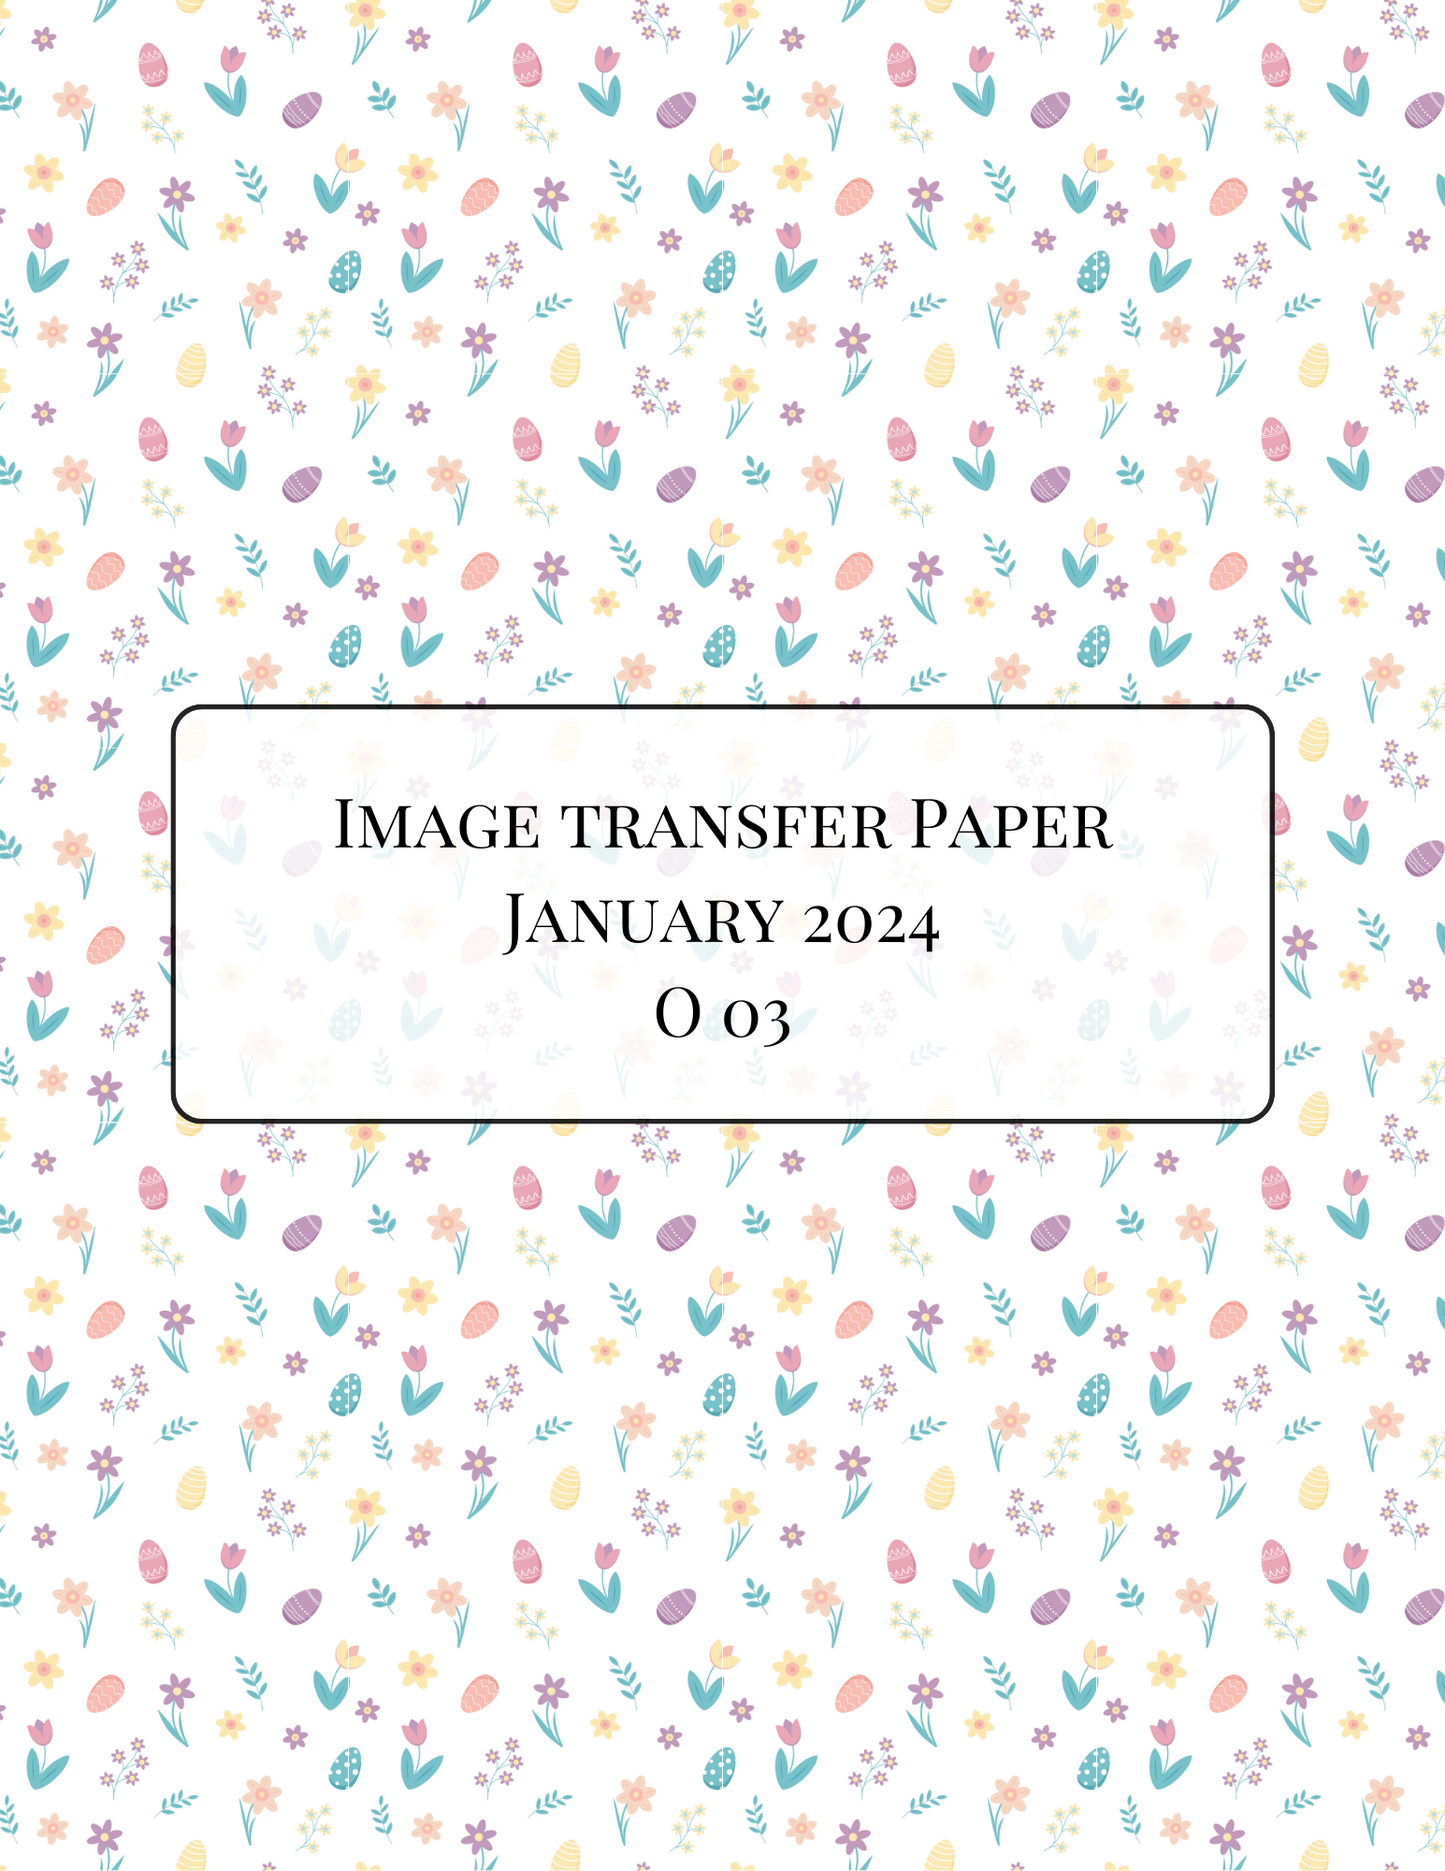 O03 Transfer Paper - January Launch